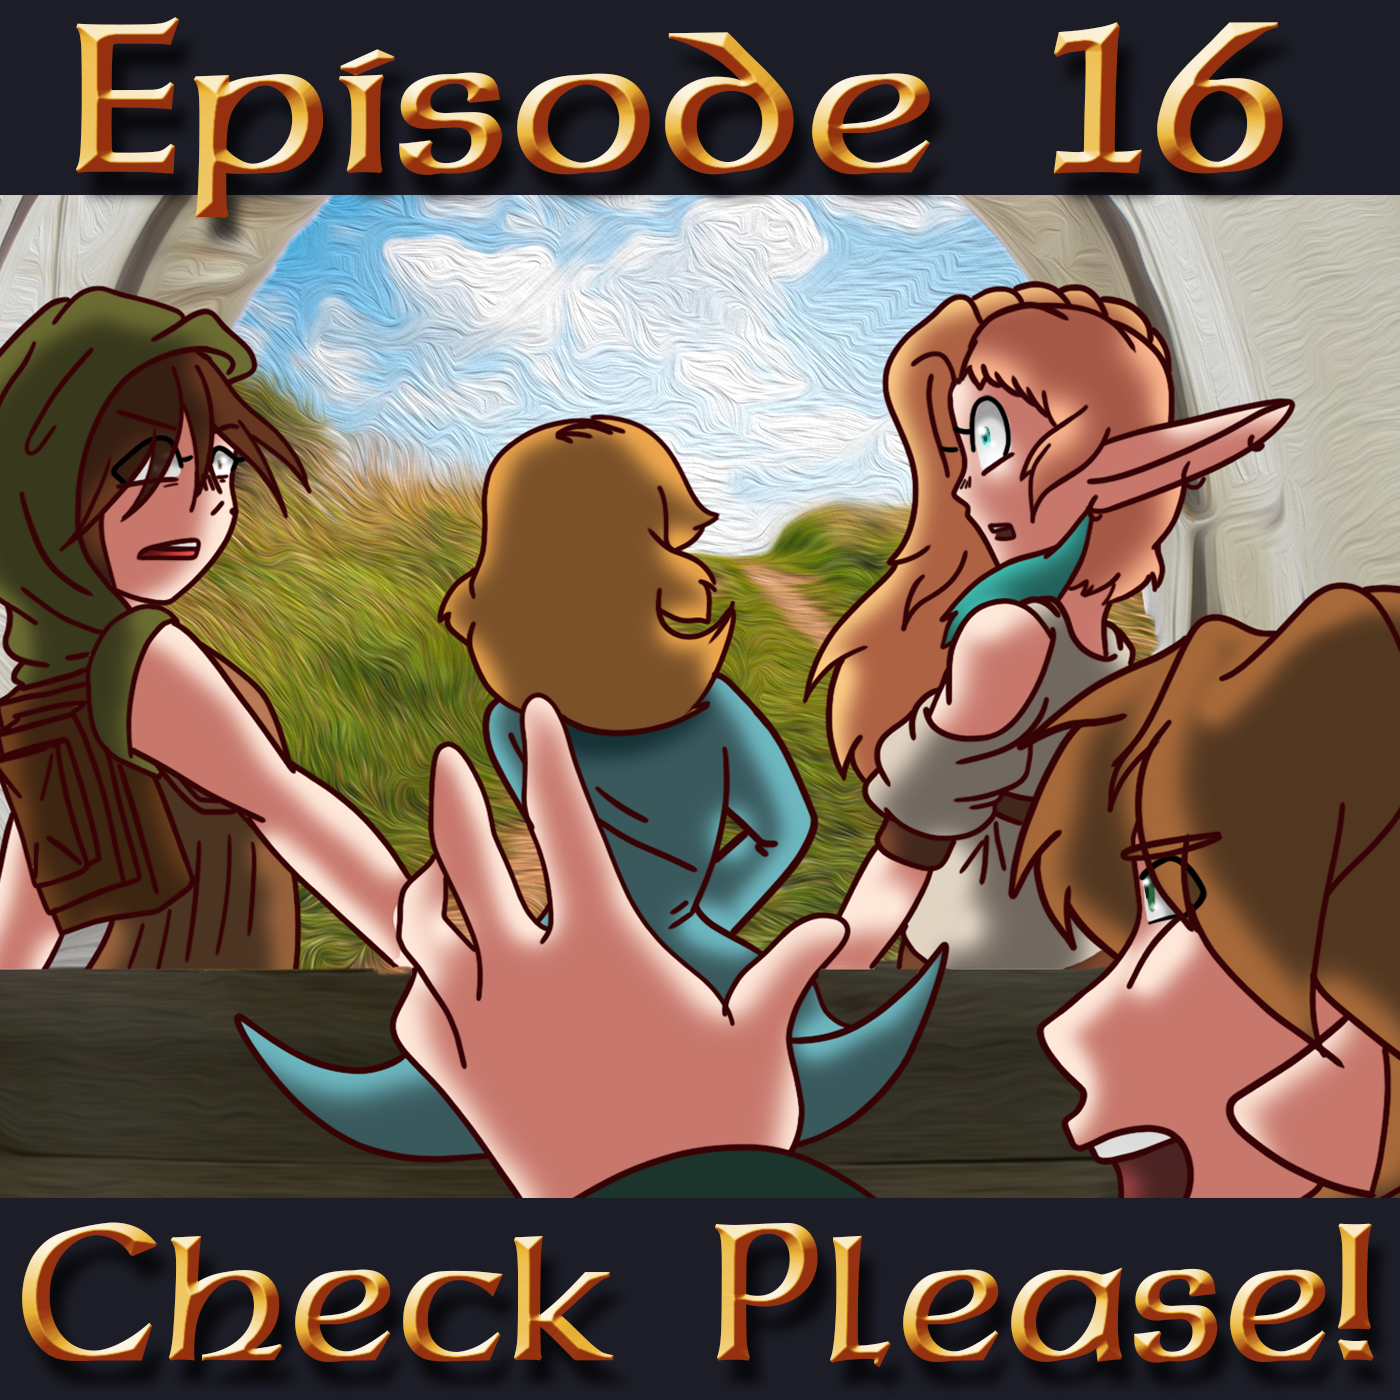 Check Please! S1 E16: You did WHAT to my Fiance?!